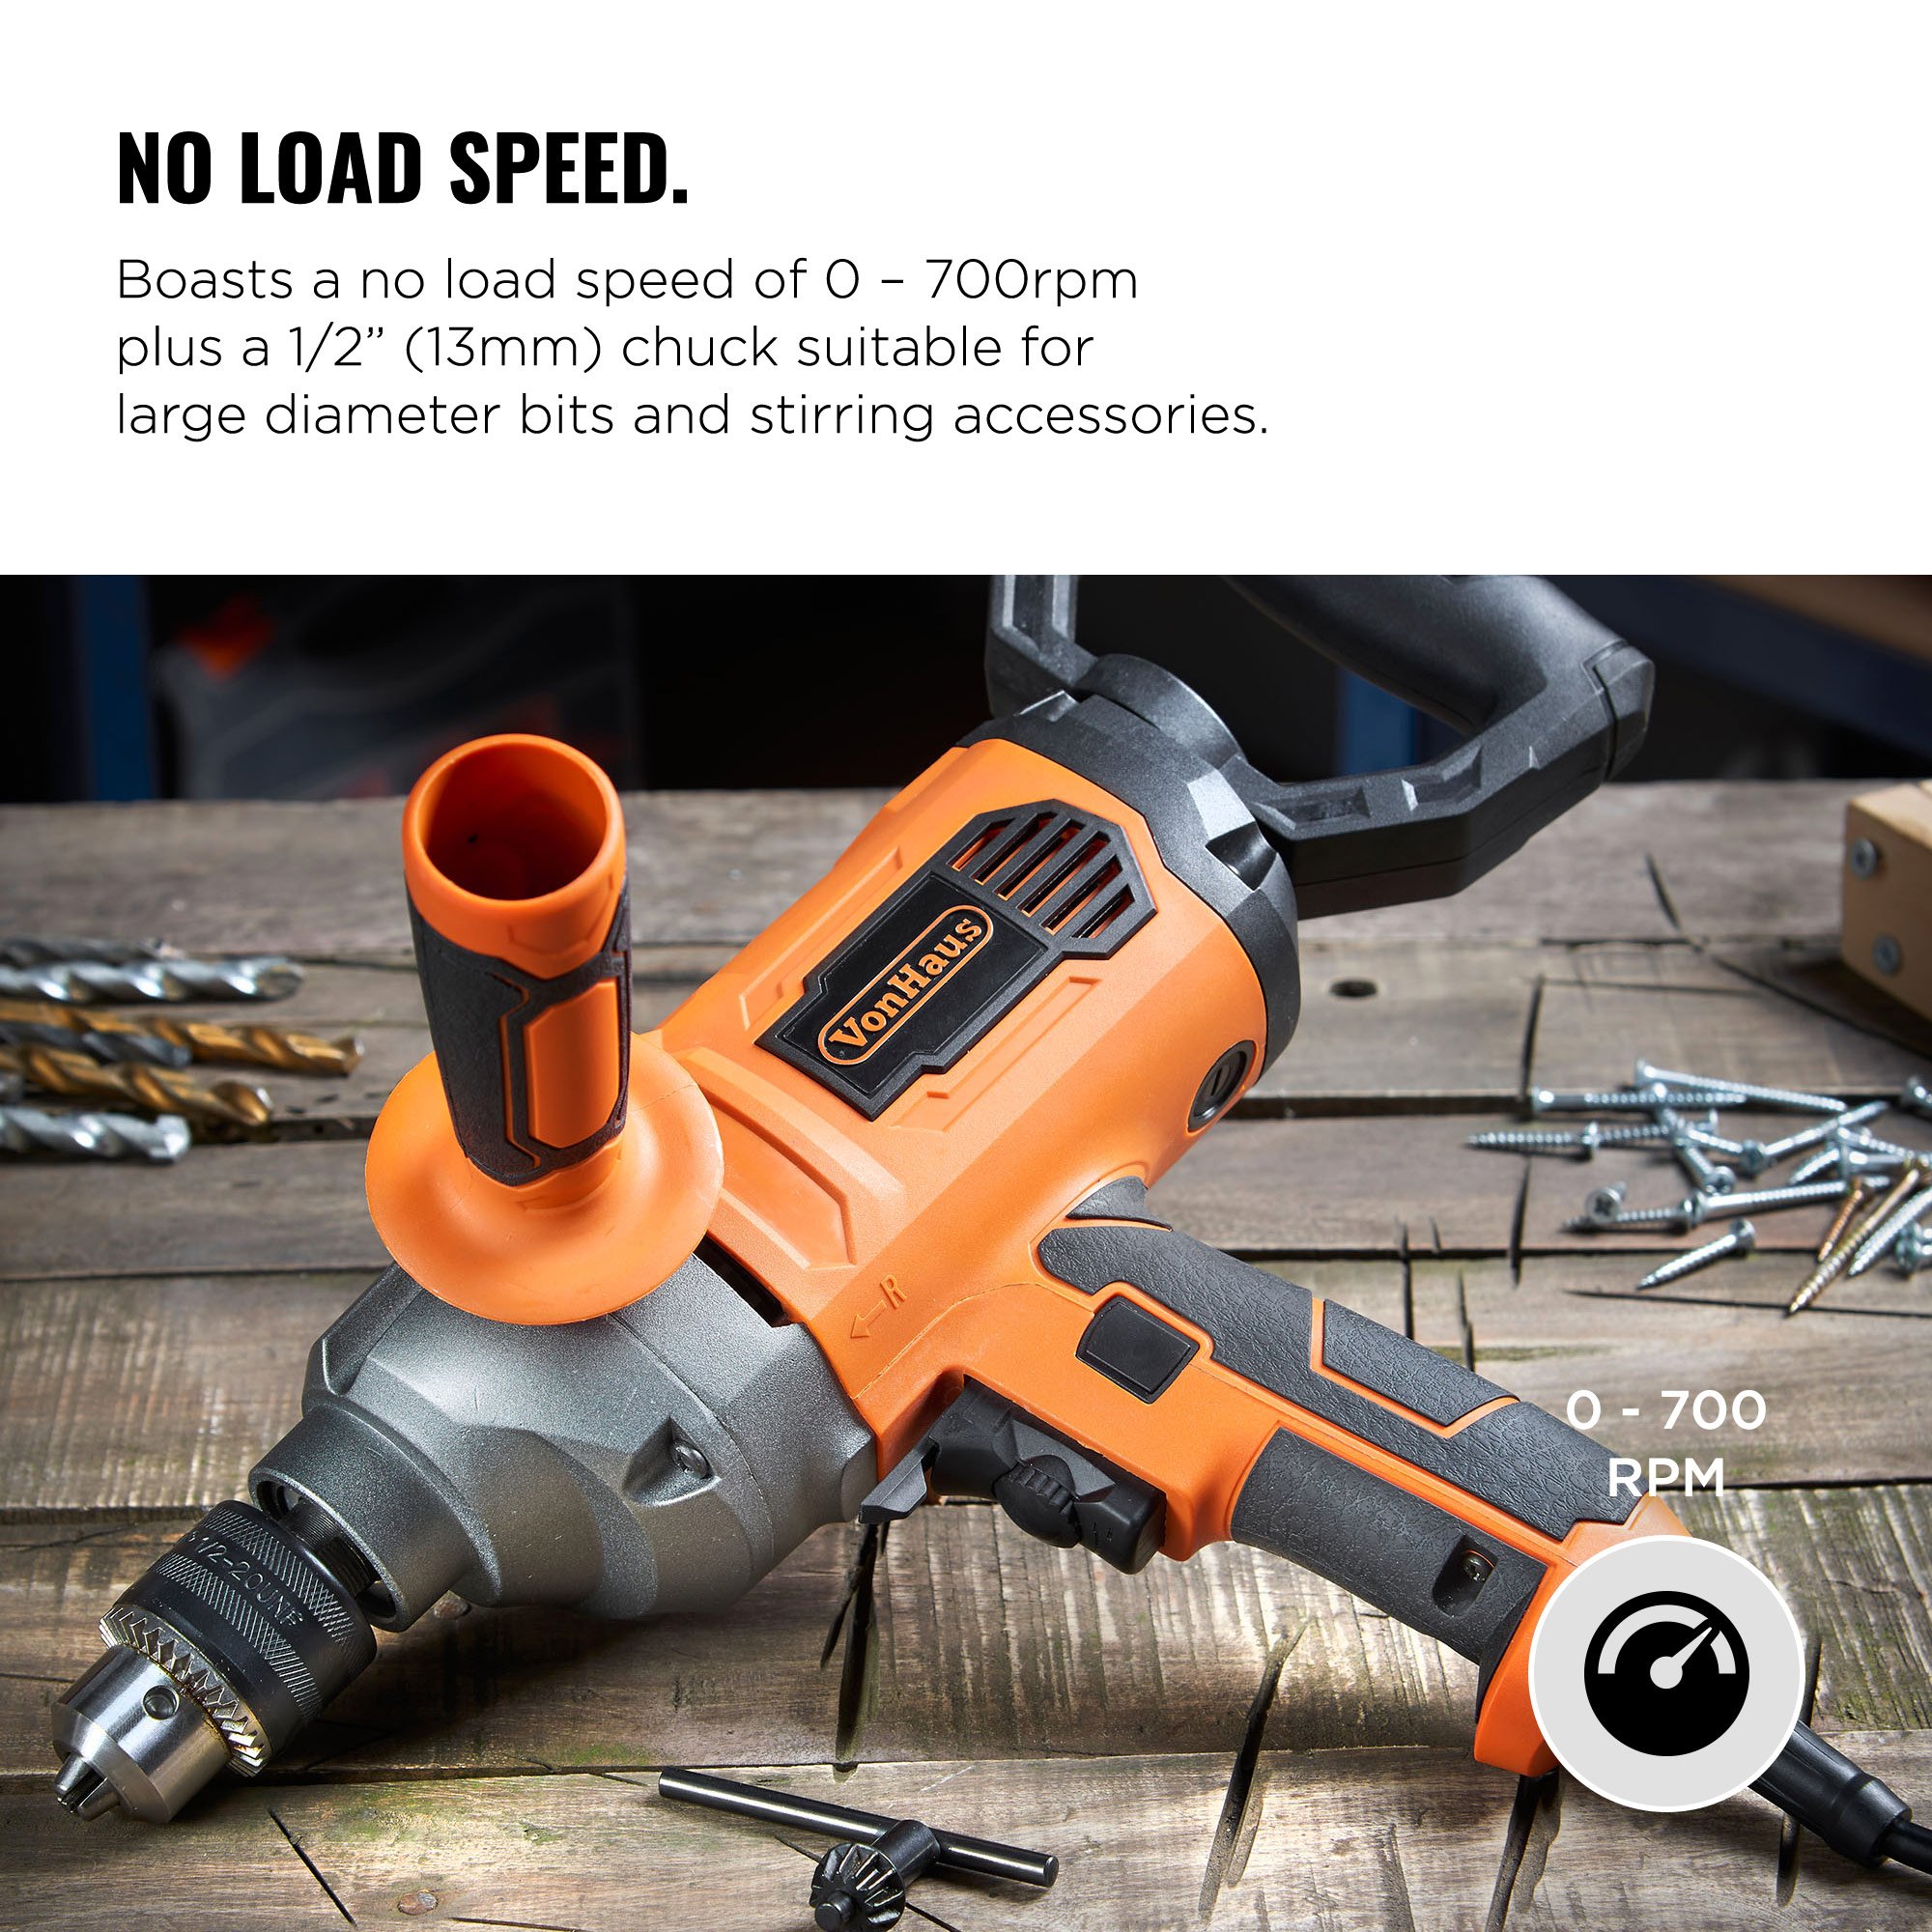 VonHaus 10 Amp 1/2” Heavy Duty Drill Mud Mixer with Spade Handle and Variable Speeds For Drilling and Mixing